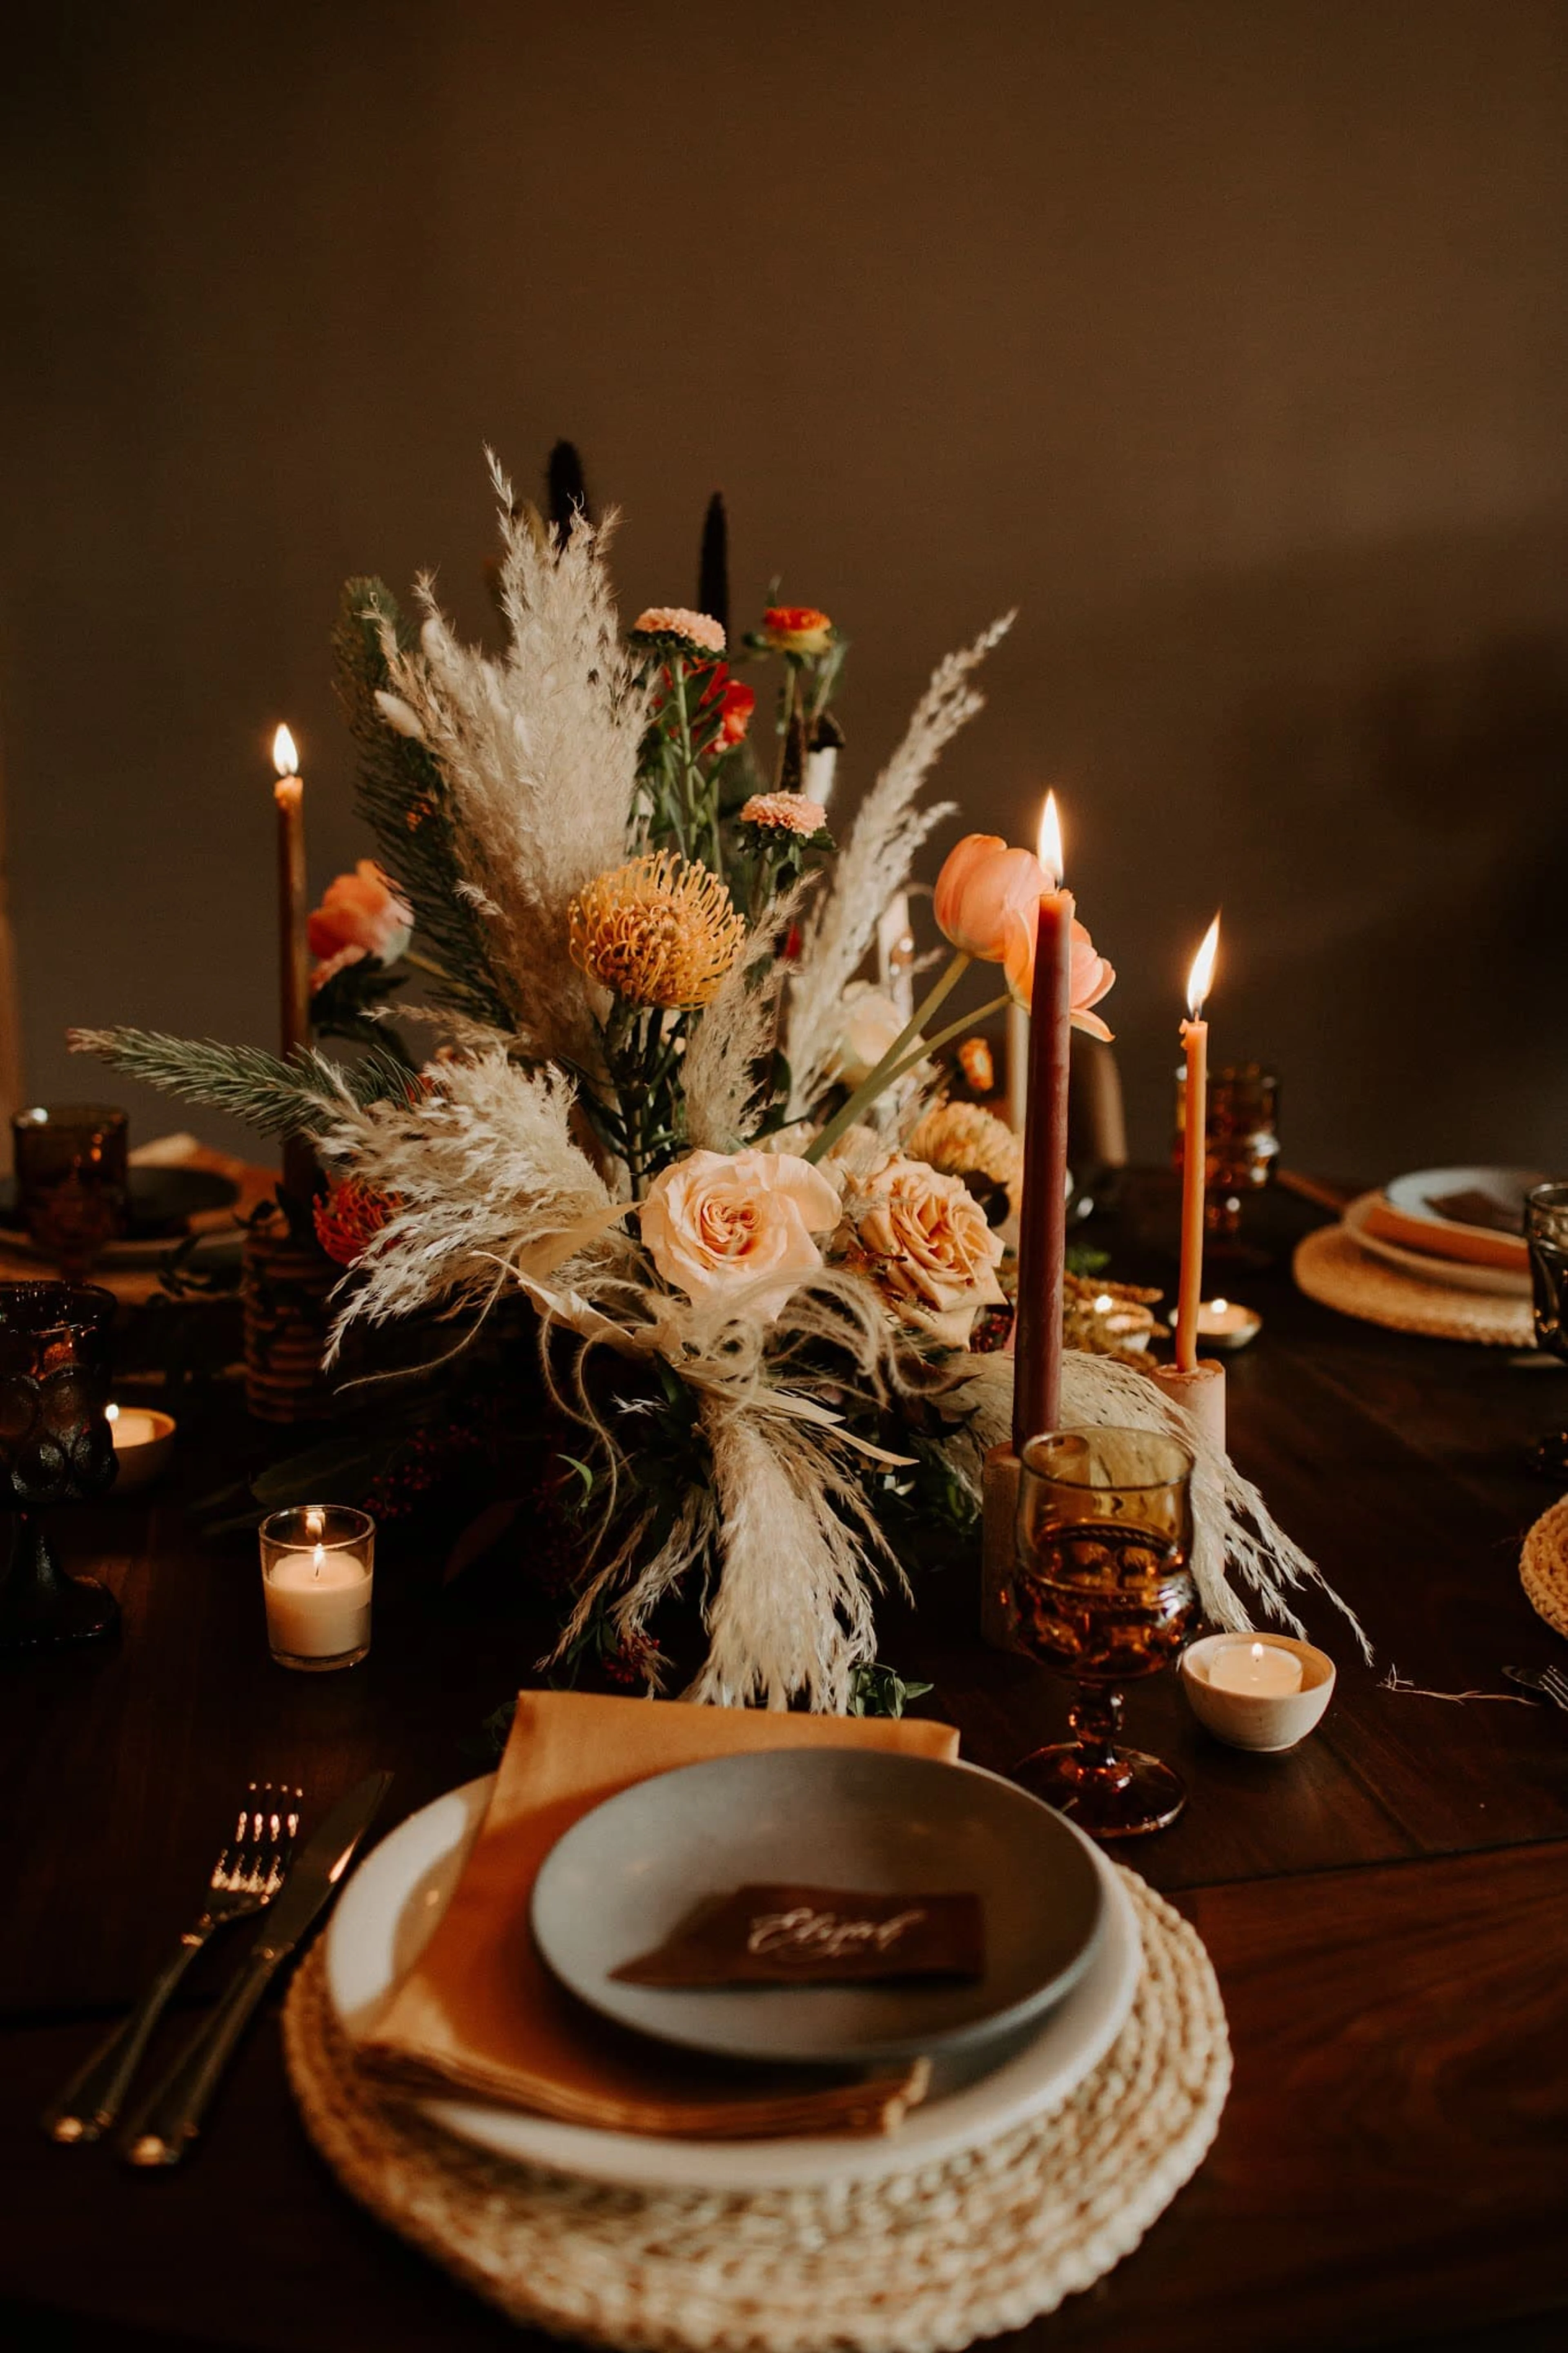 An elegant table setting with a flower arrangement and candles